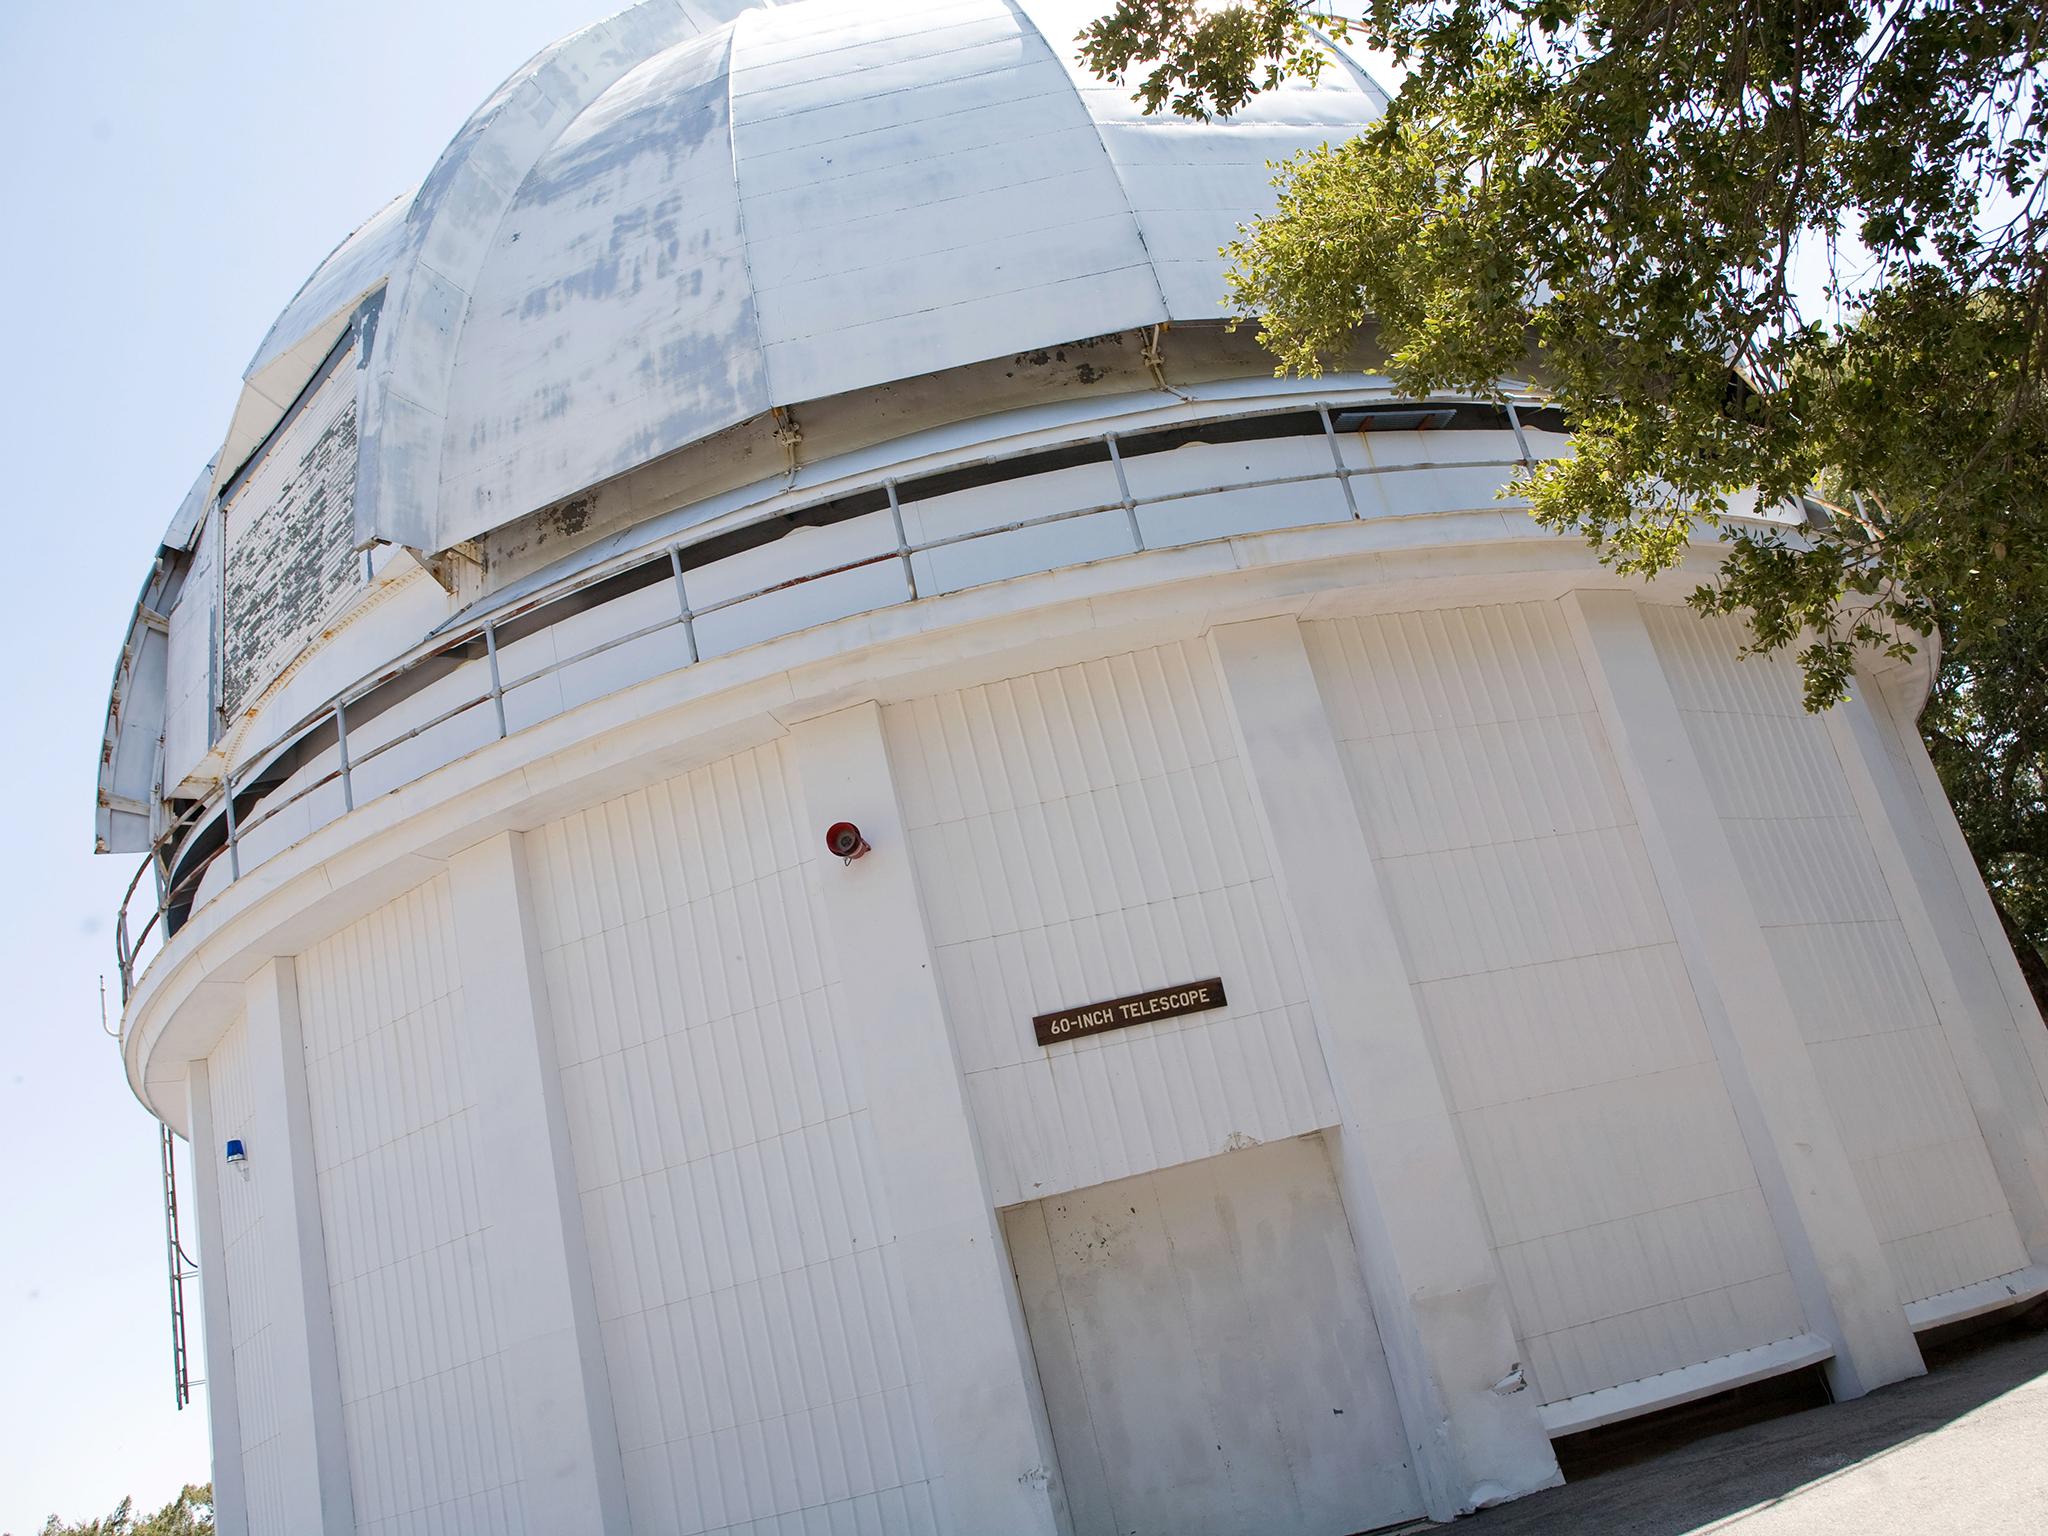 Mount Wilson Observatory in the San Gabriel Mountains, California. Burbidge was initially barred from here but gained access posing as an assistant